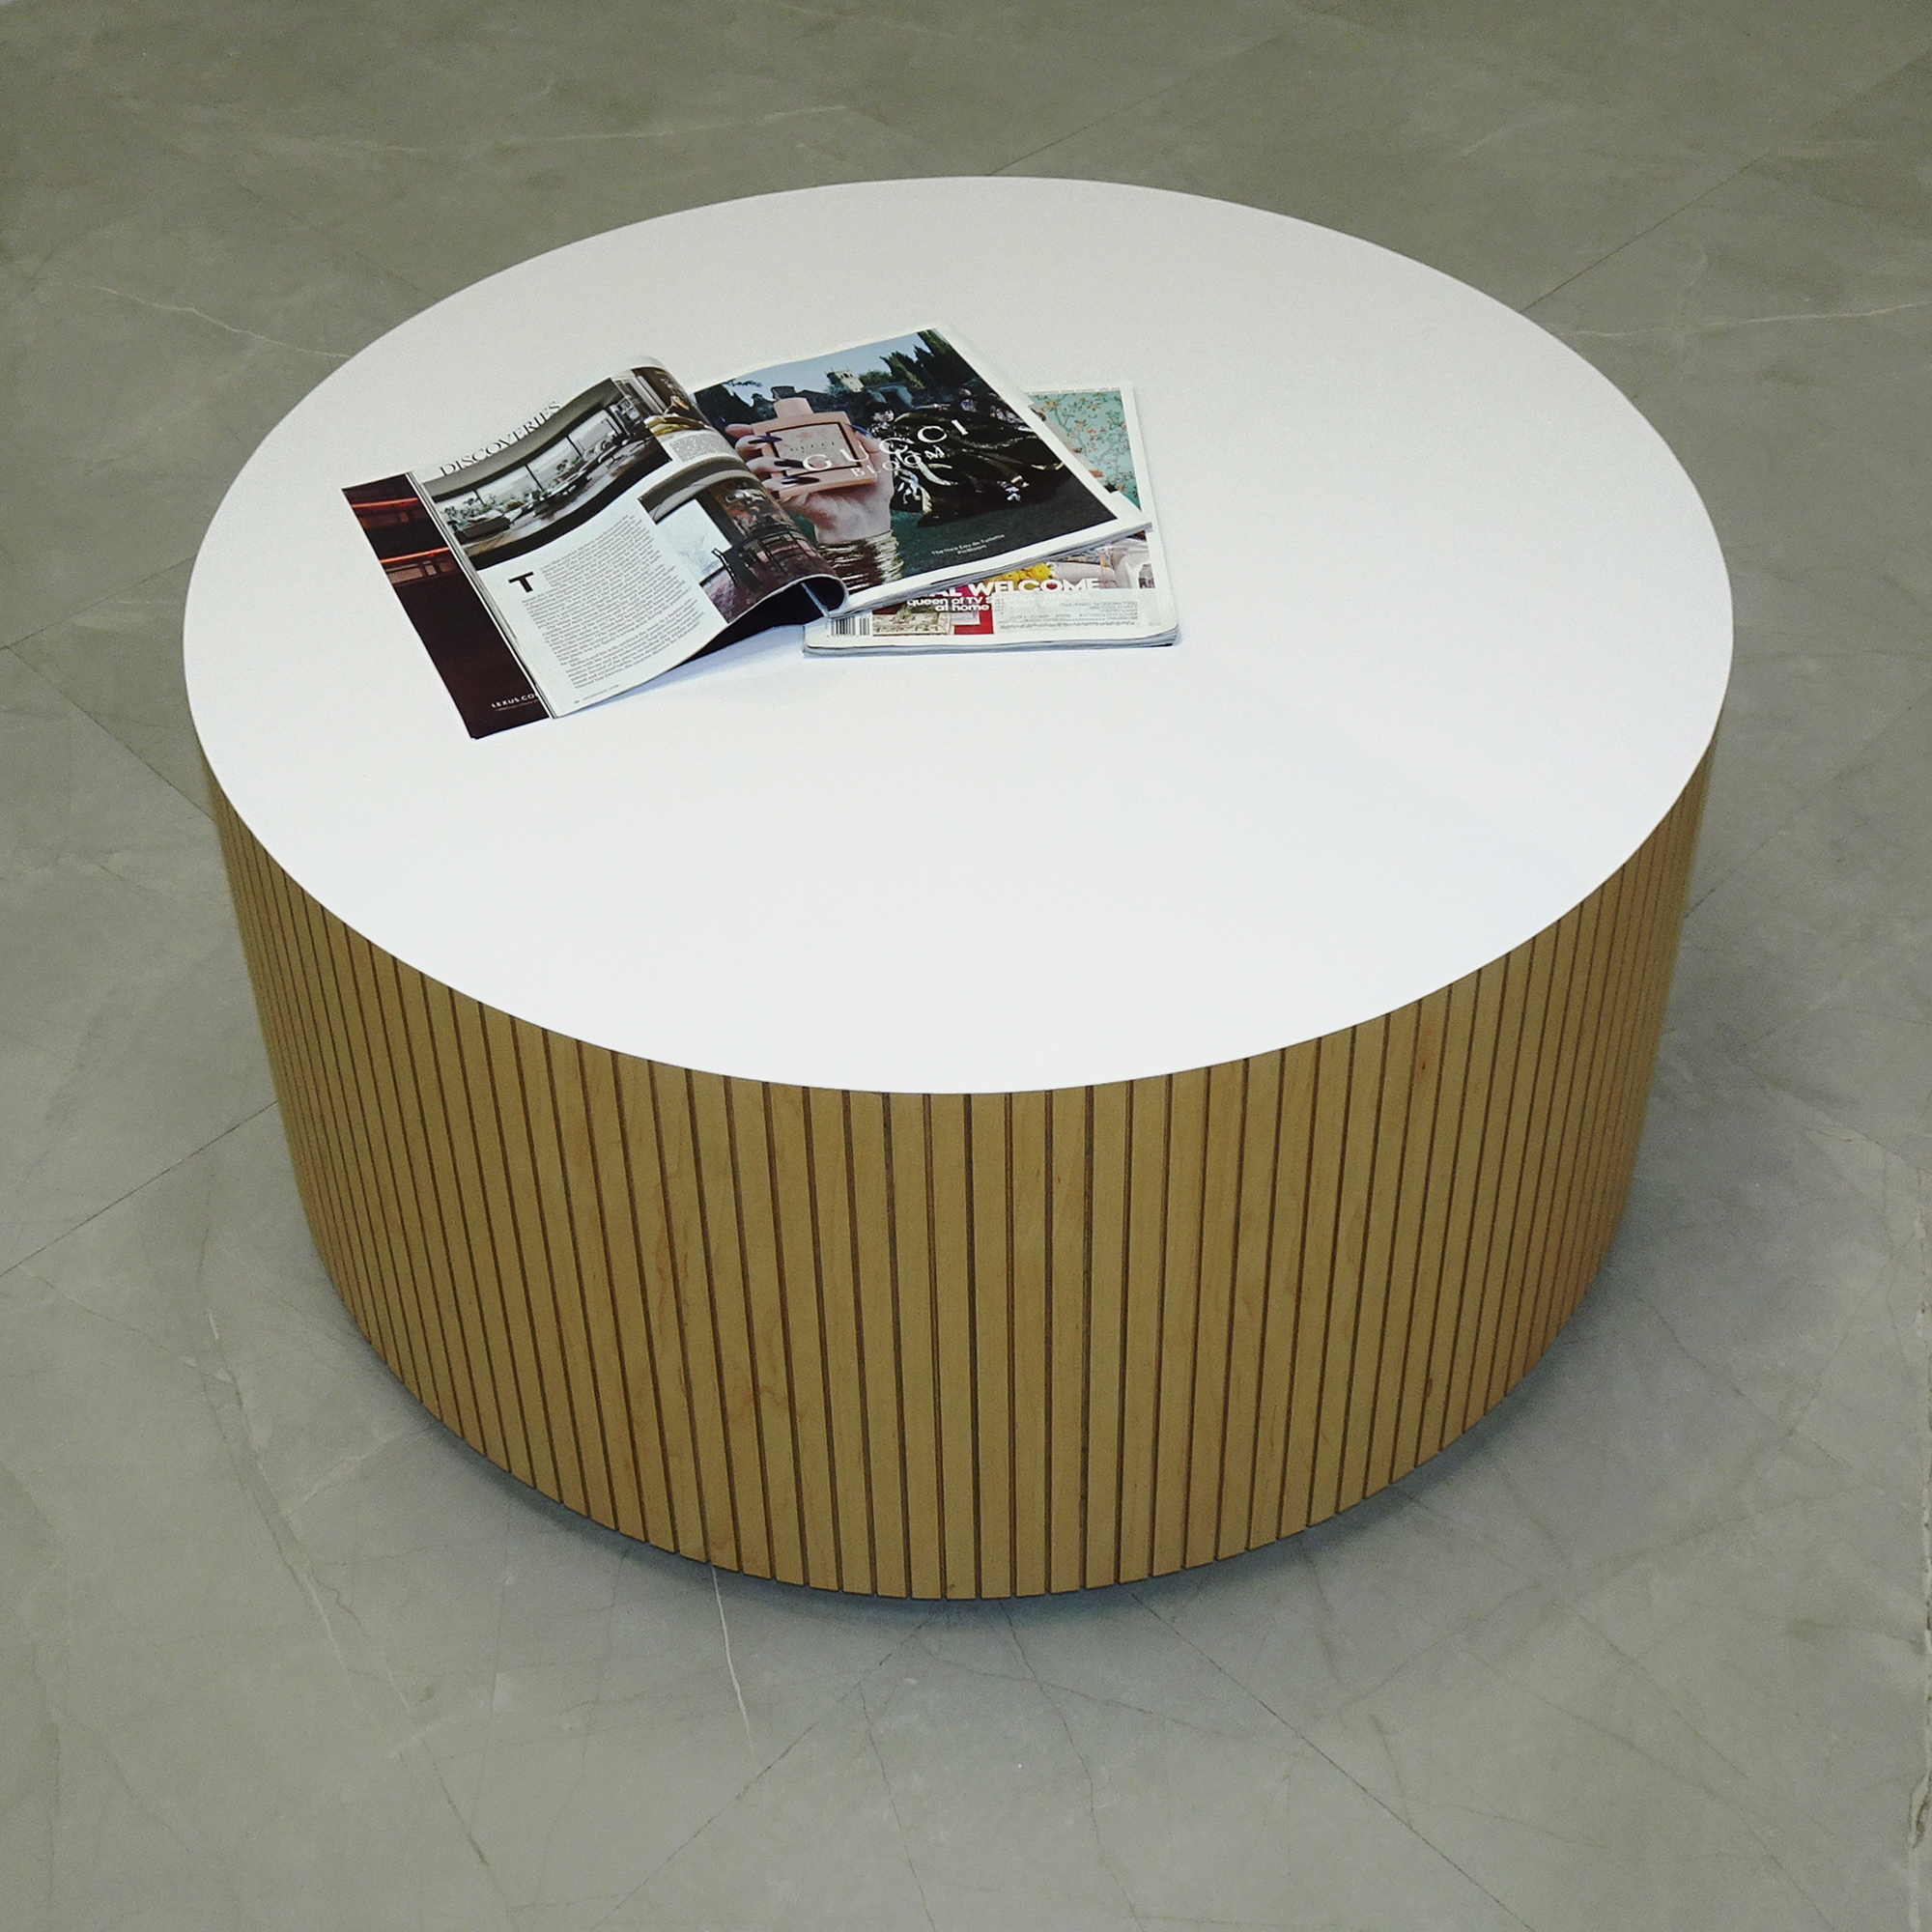 36-inch Norfolk Round Lobby Table in white gloss laminate table and maple tambour outside, shown here.